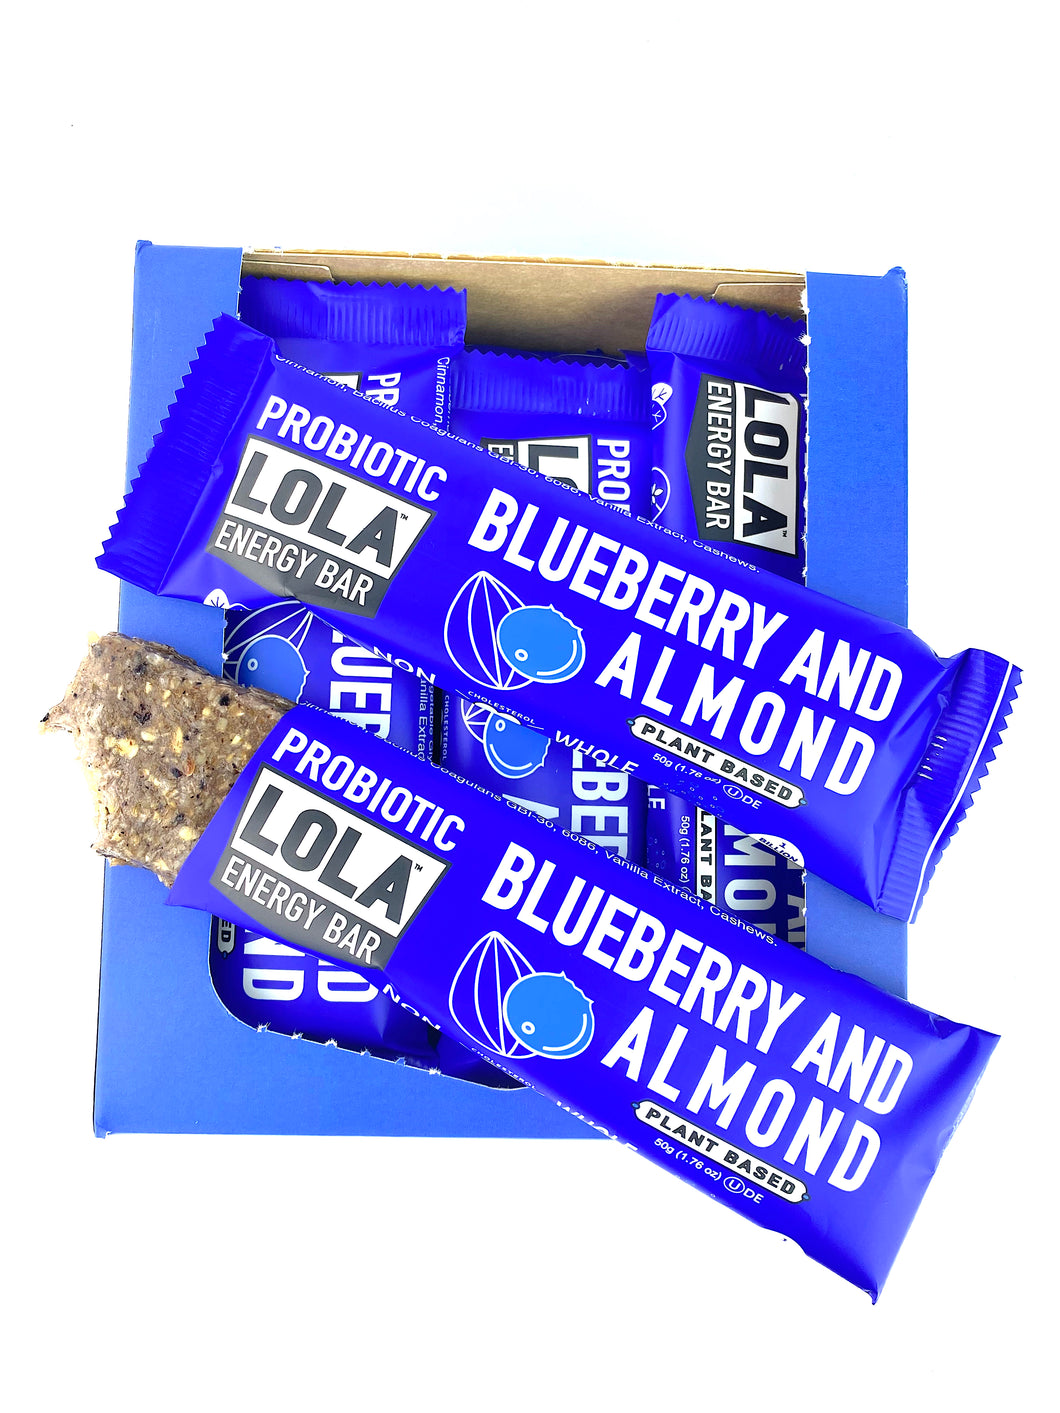 box of blueberry almond bars with bars sticking out, one is partially unwrapped